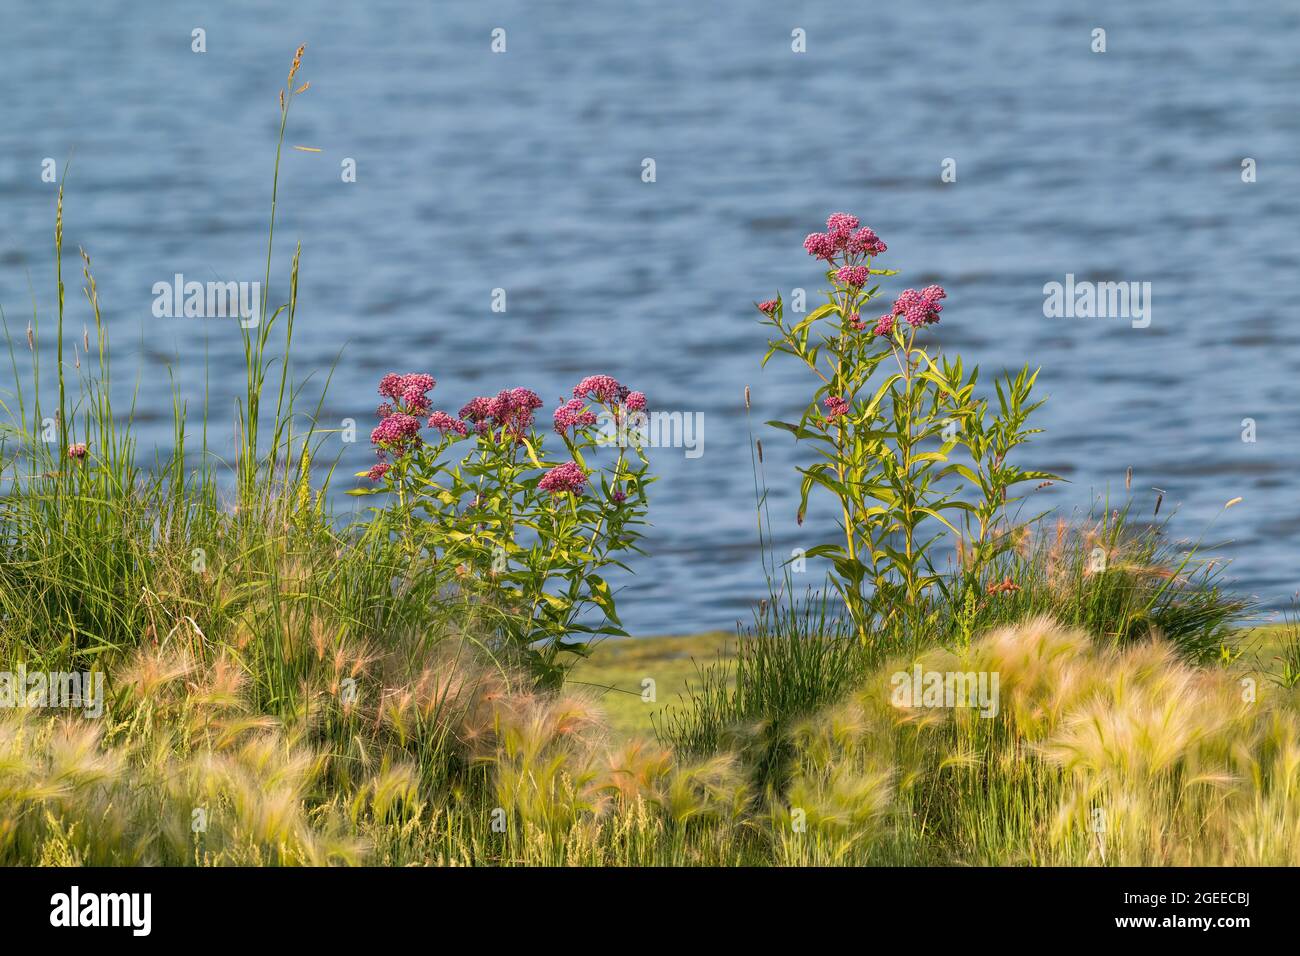 Swamp Milkweed flowers in full bloom, and native grasses, growing along a lake shoreline in the state of Colorado. Stock Photo